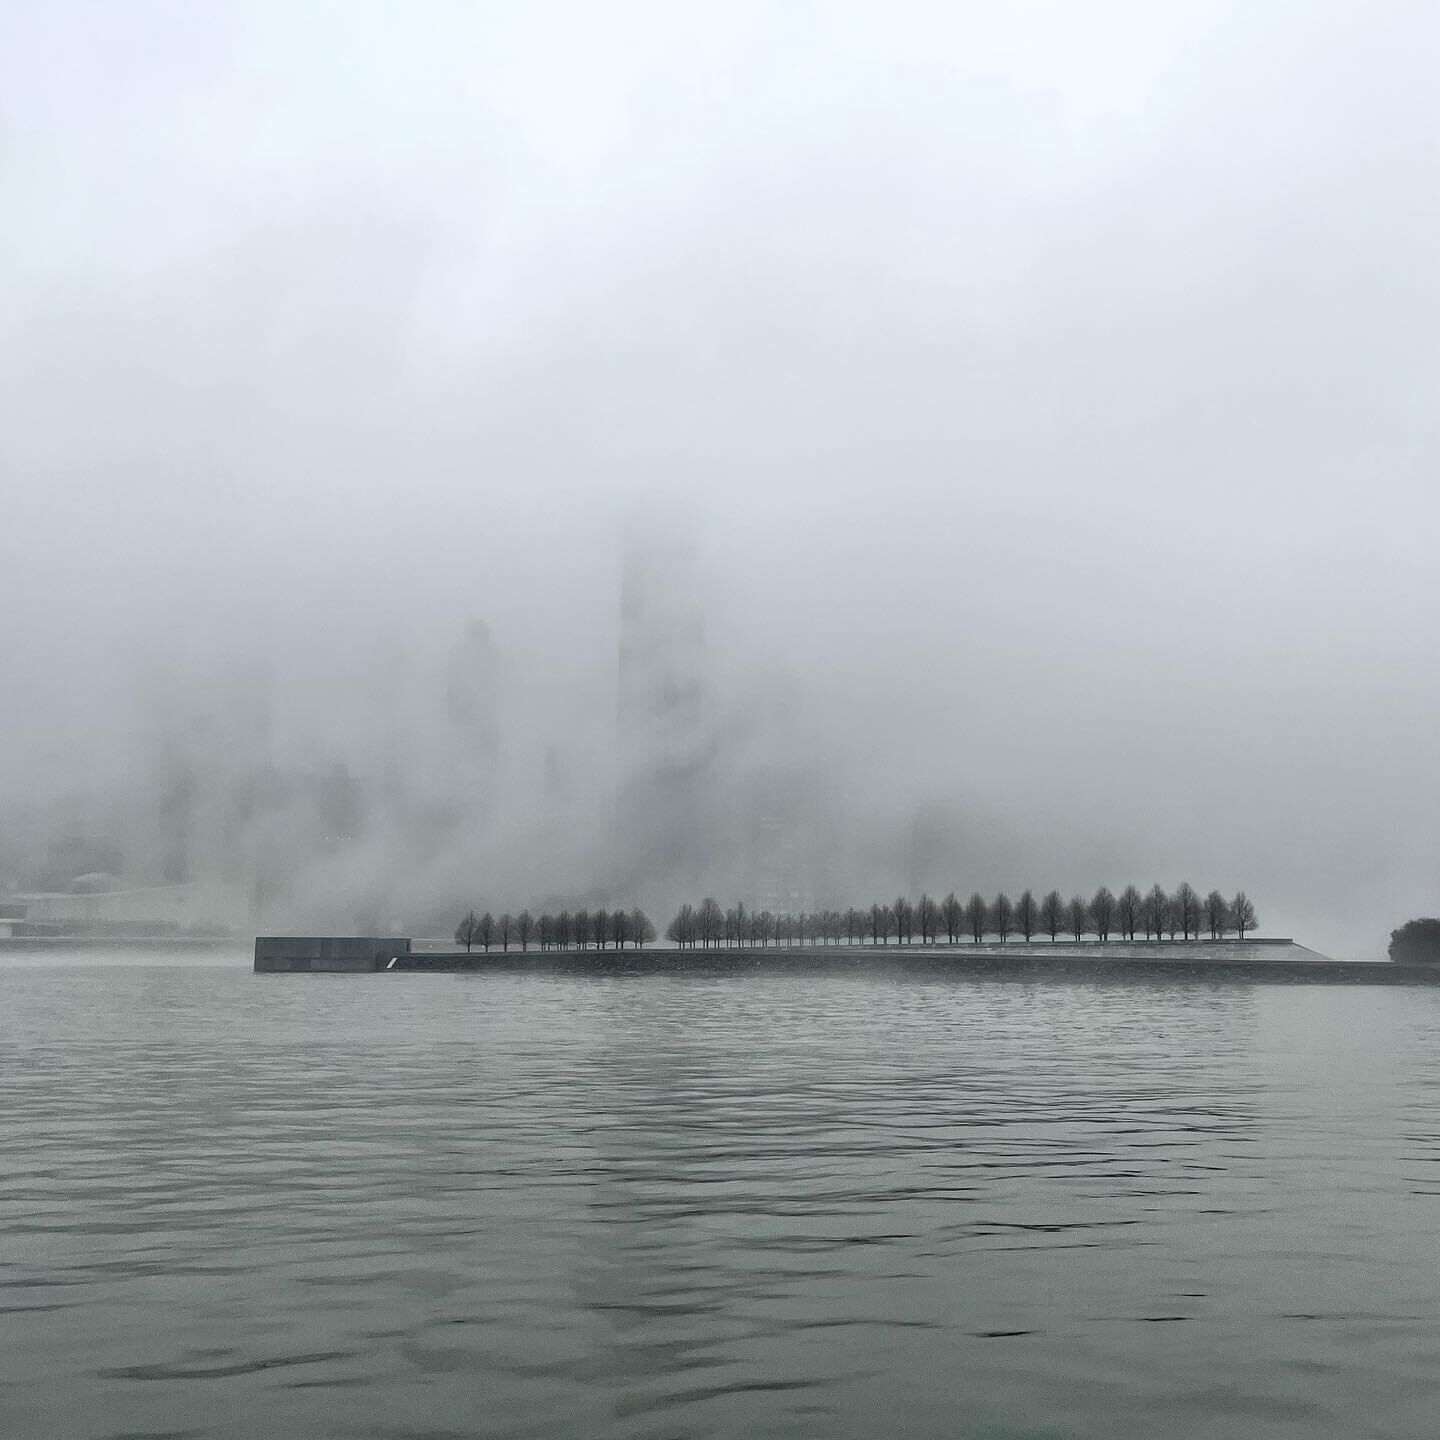 Four Freedoms Park emerging in the morning fog. @4freedomspark #fourfreedomspark #louiskahn #newyork #newyorkcity #architecture #architecturephotography